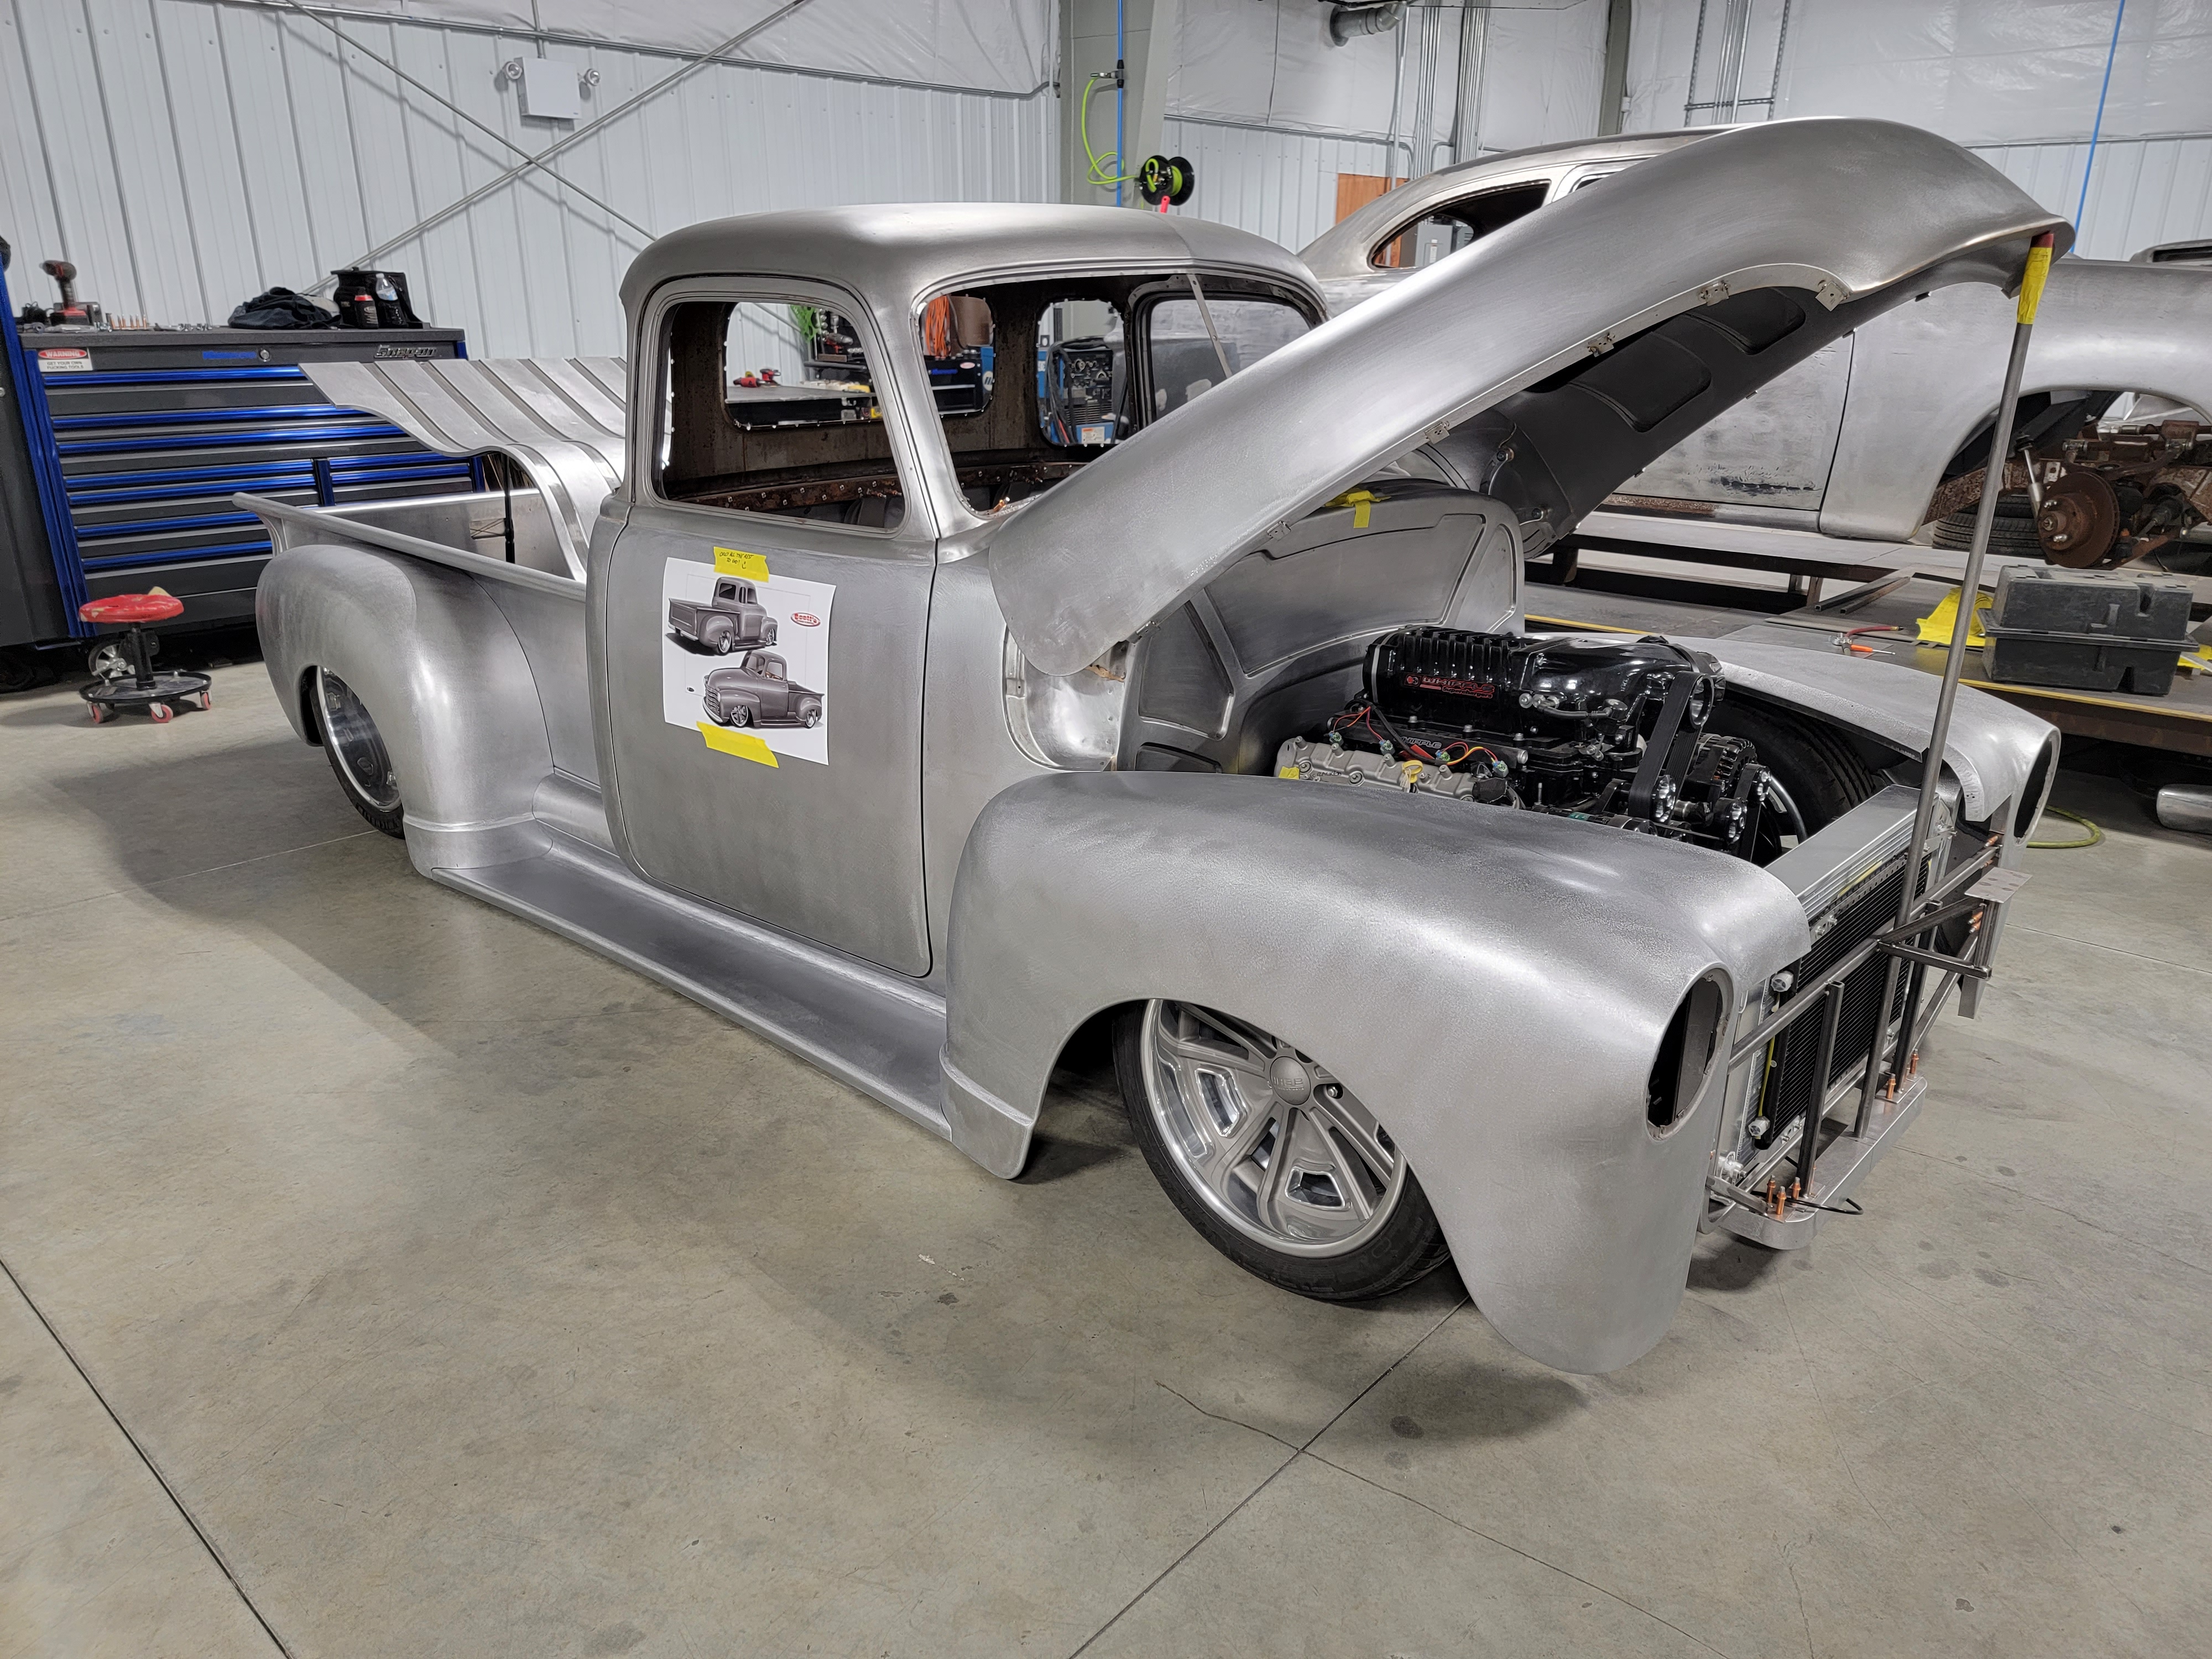 scotts-hotrods-51-chevy-project-truck-2662